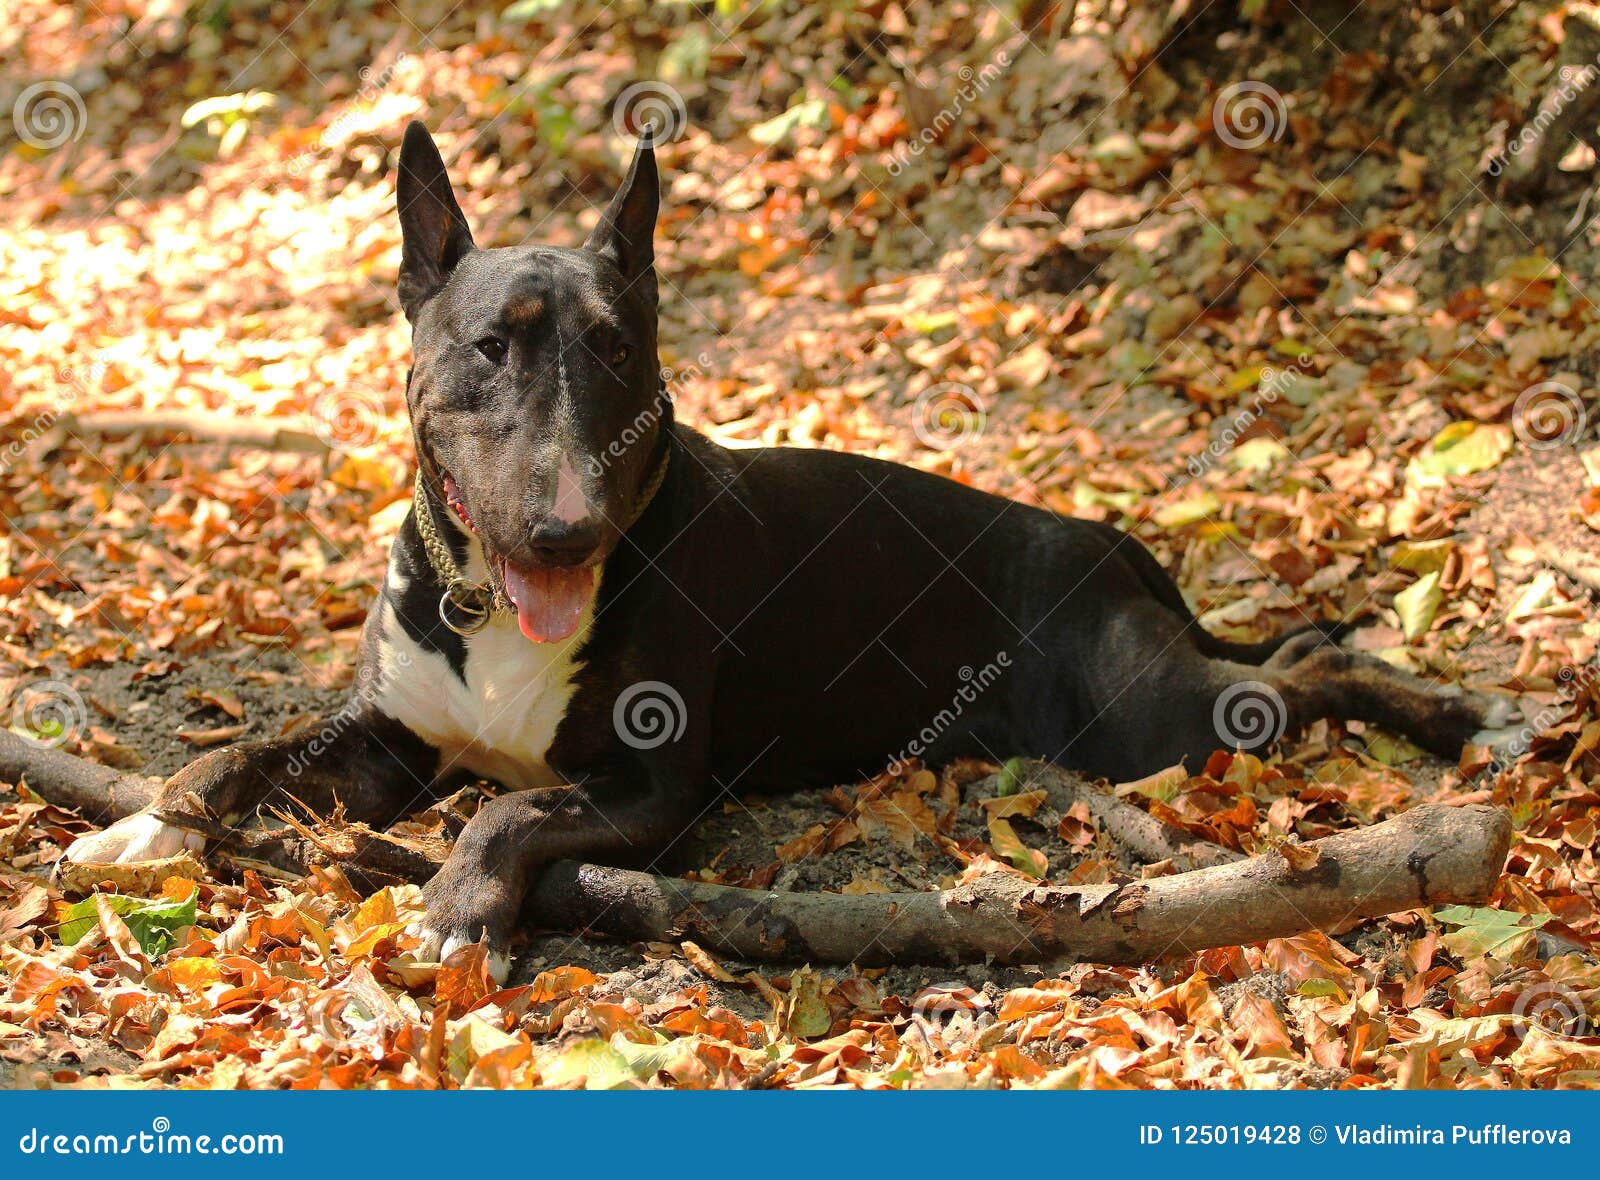 Black English Bull Terrier Male Relaxing In Autumn Forest In Coloured Fallen Leaves Stock Photo Image Of Forest Coloured 125019428